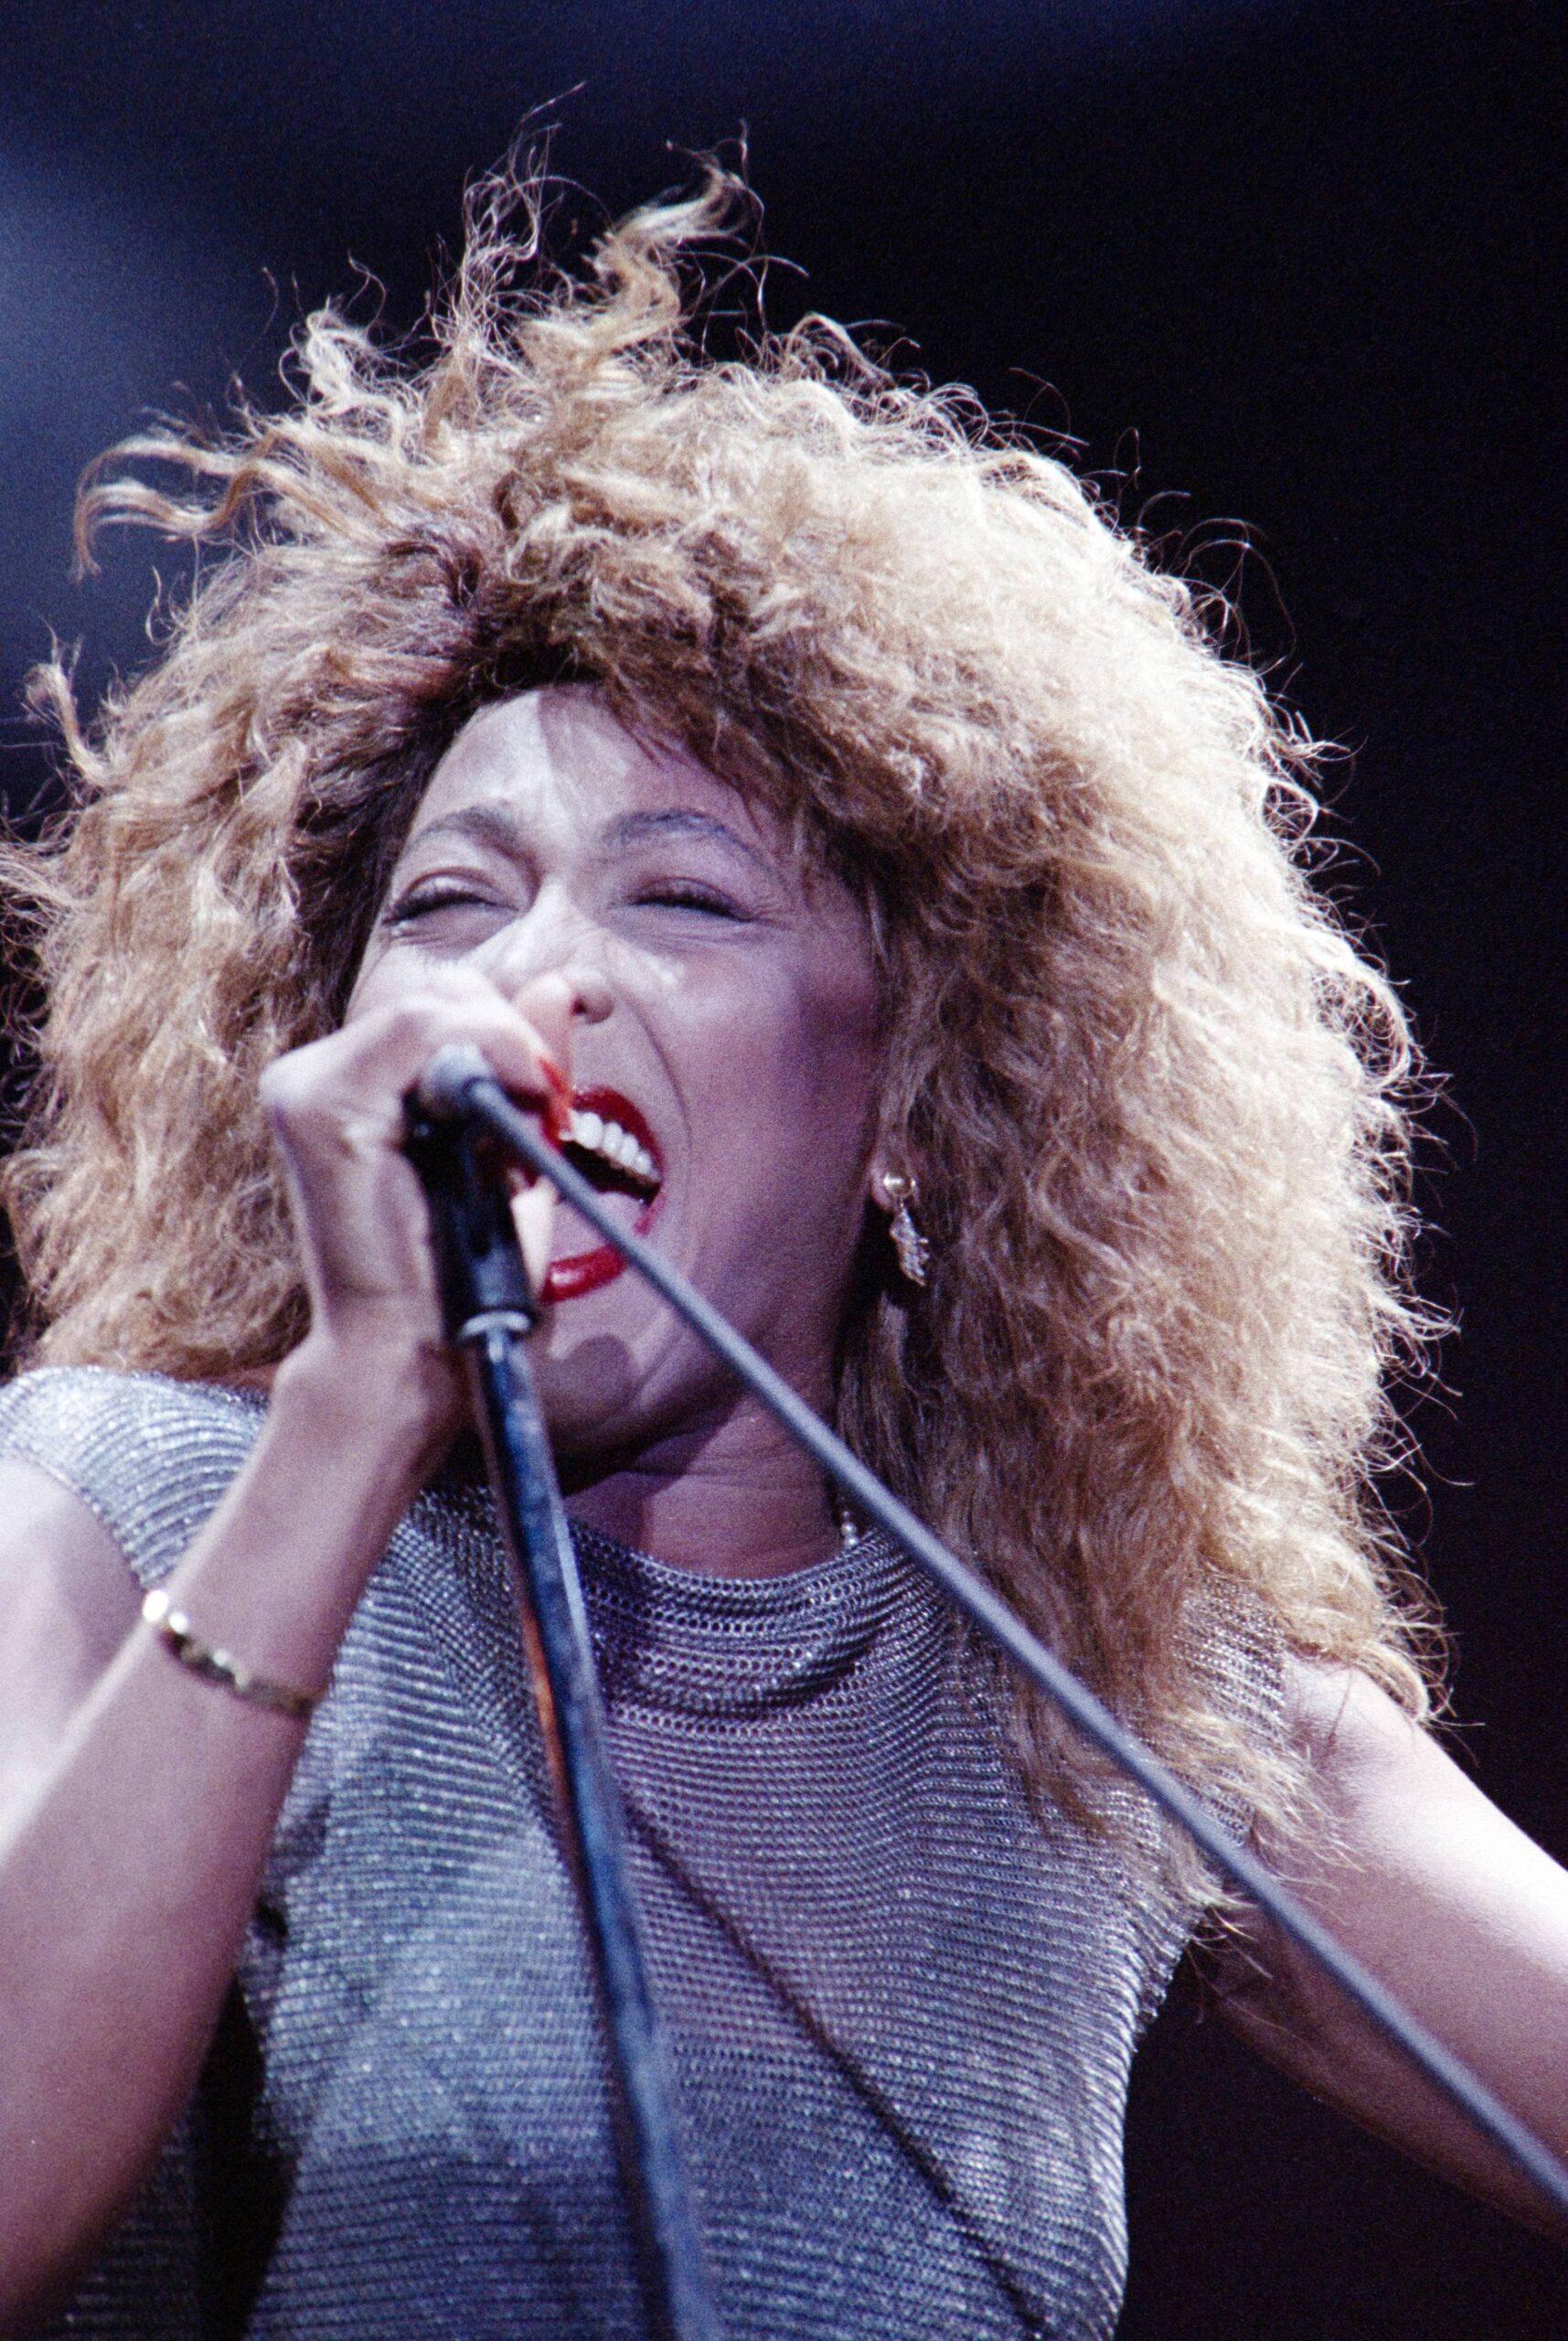 May 1993 Tina Turner performing at an unidentified event Precise date not known